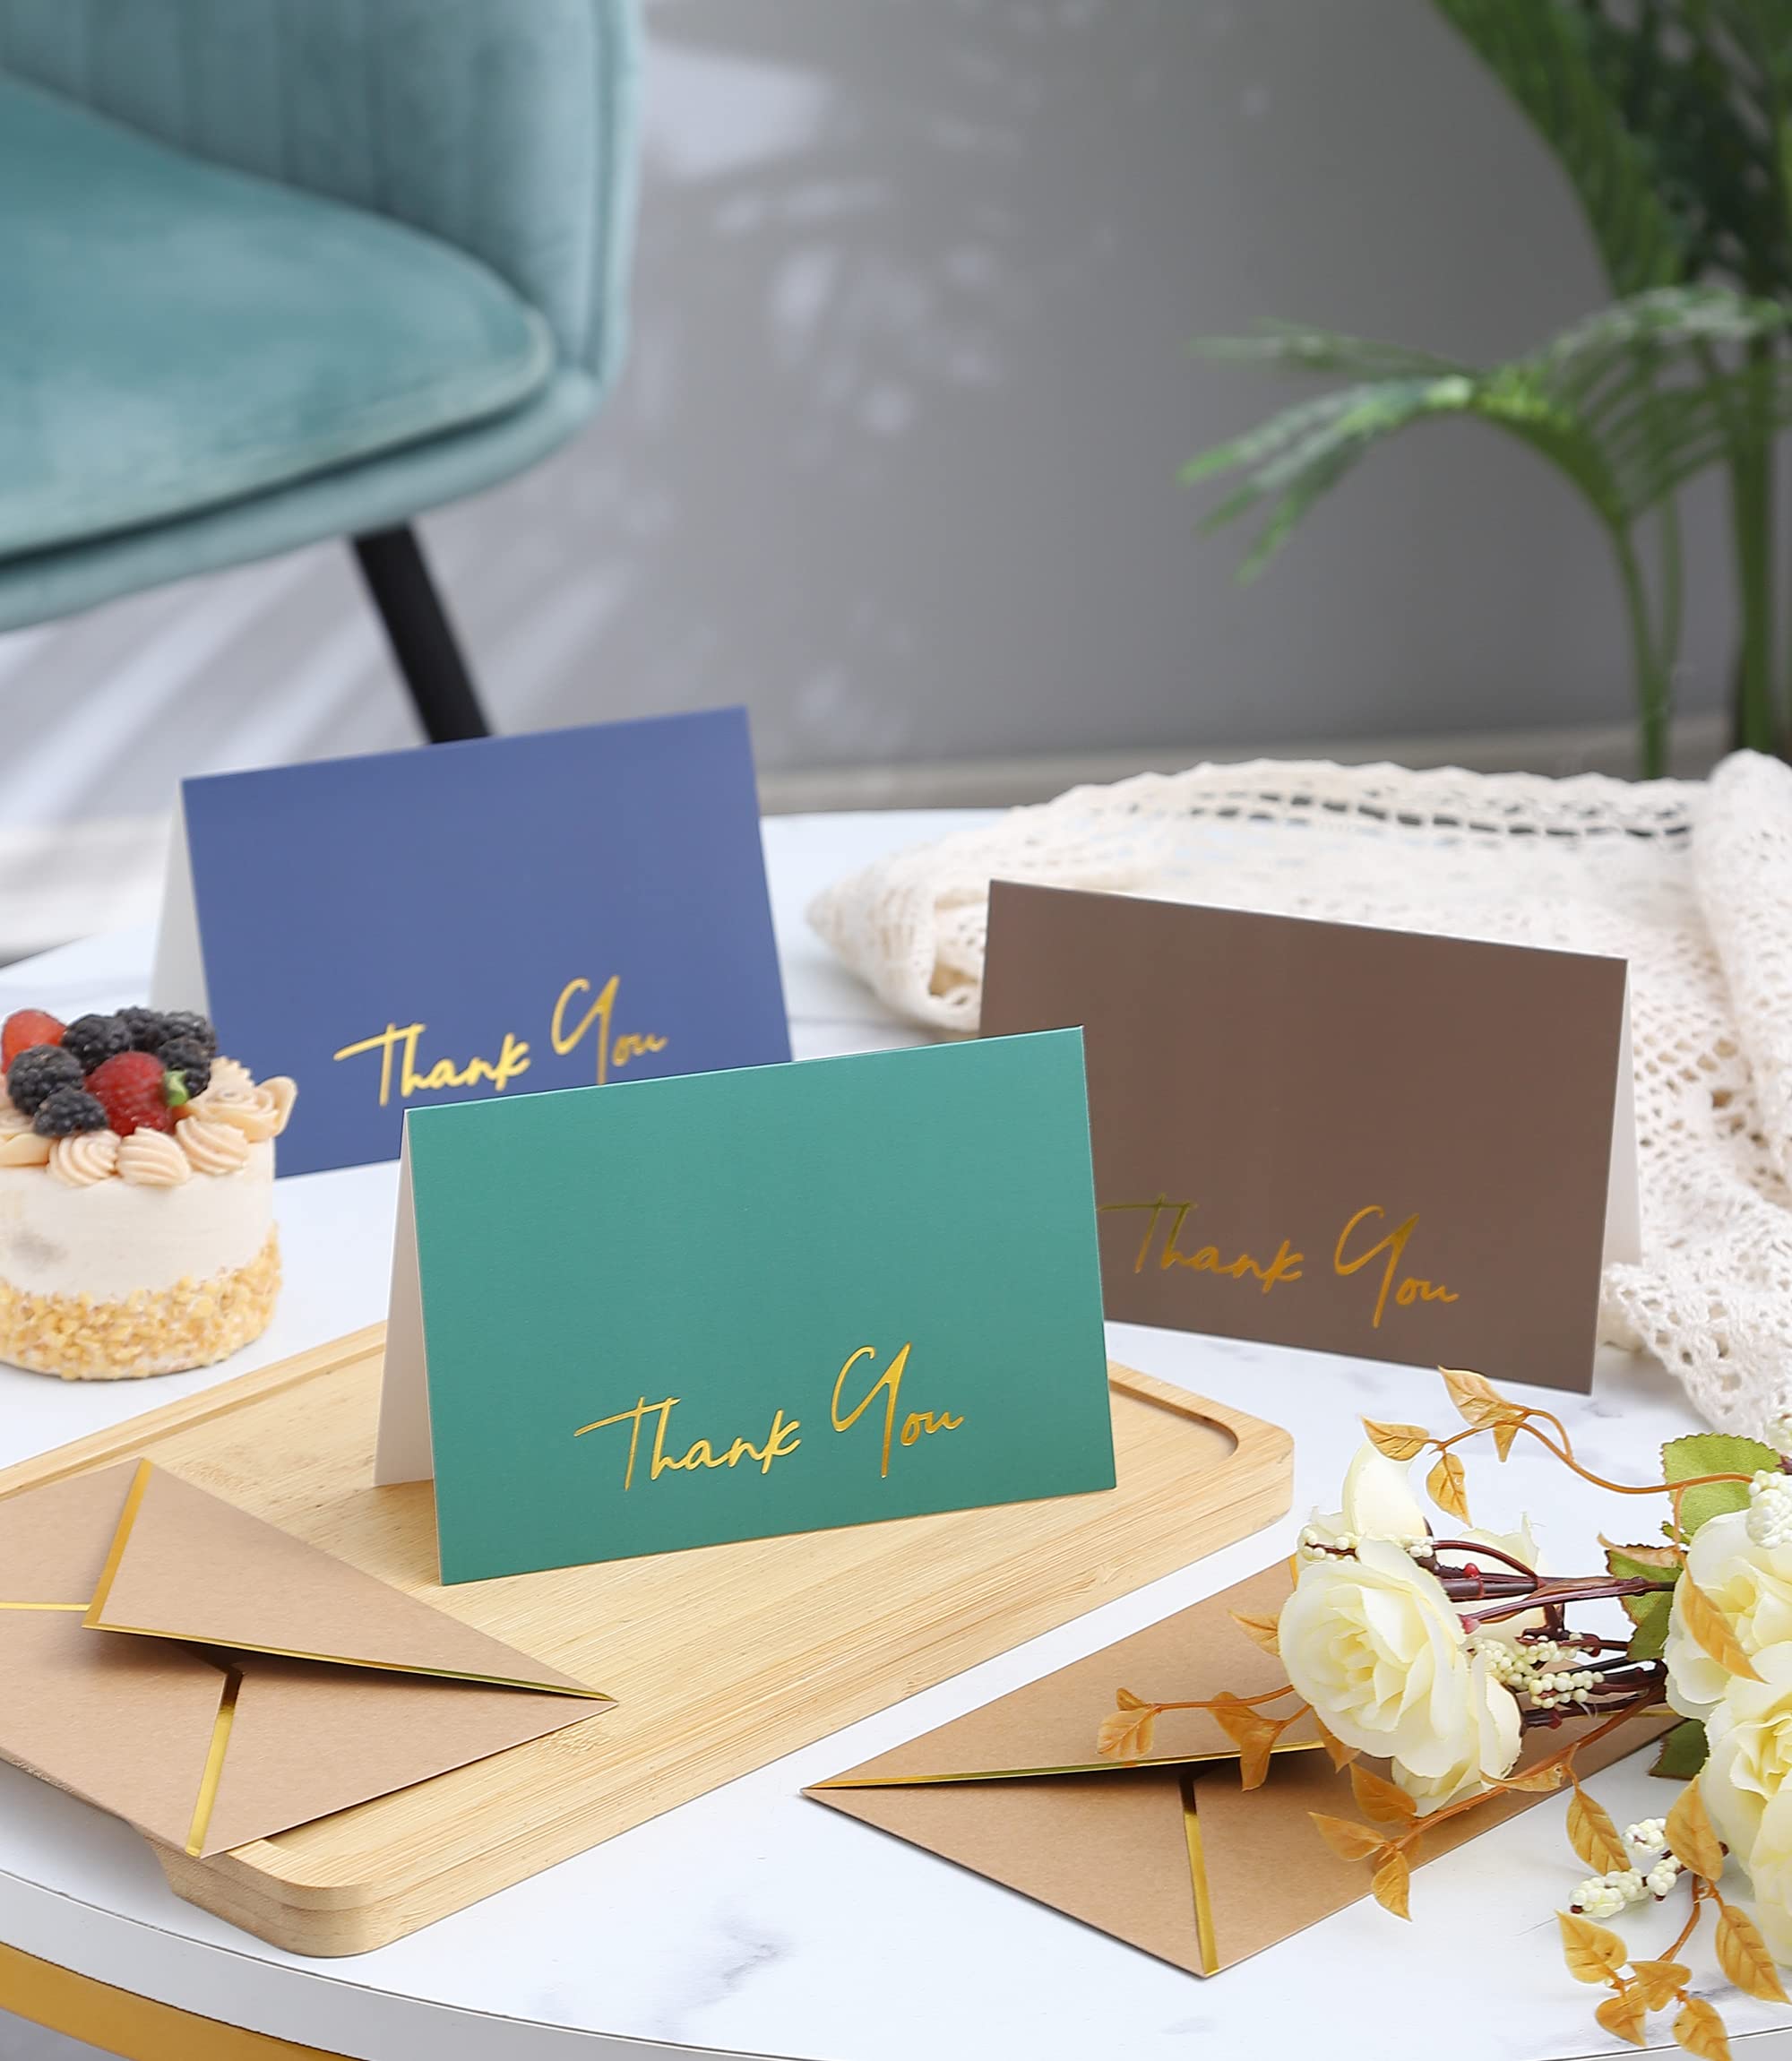 Heavy Duty Thank You Cards with Envelopes - 36 PK - Gold Thank You Notes 4x6 Inches Thank You Cards Wedding Thank You Cards Small Business Graduation Bridal Shower Vintage Navy Green Brown